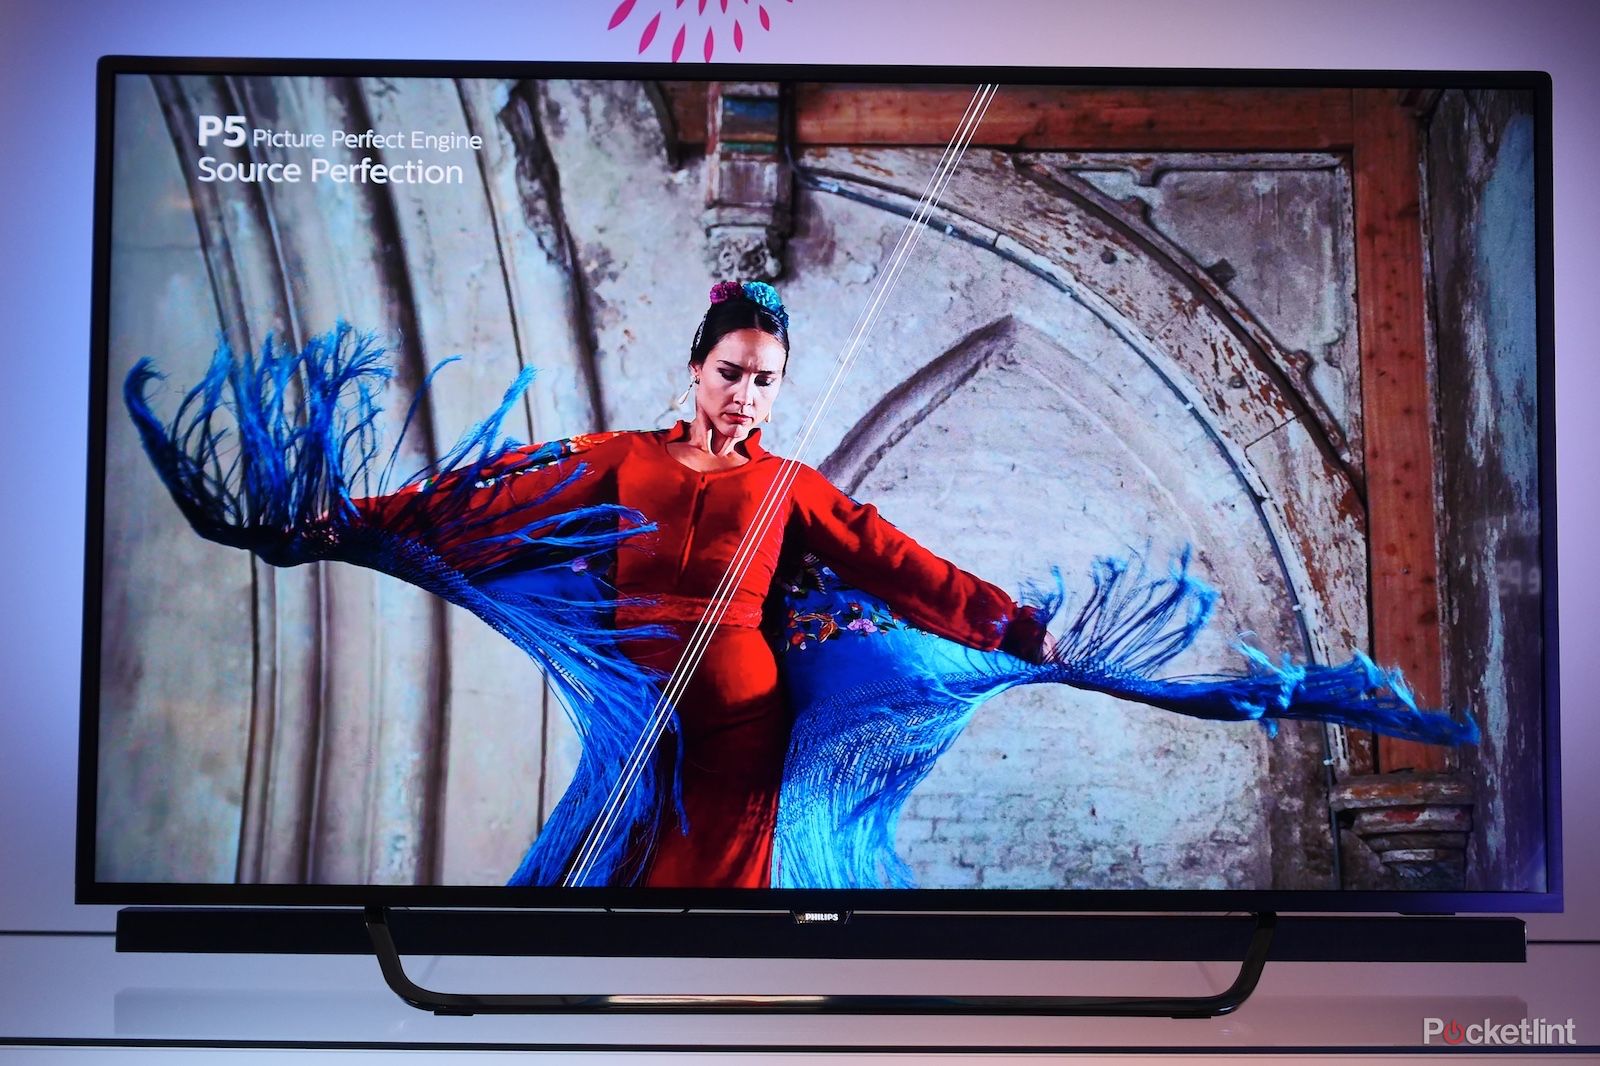 OLED vs QLED: which is the best TV technology?